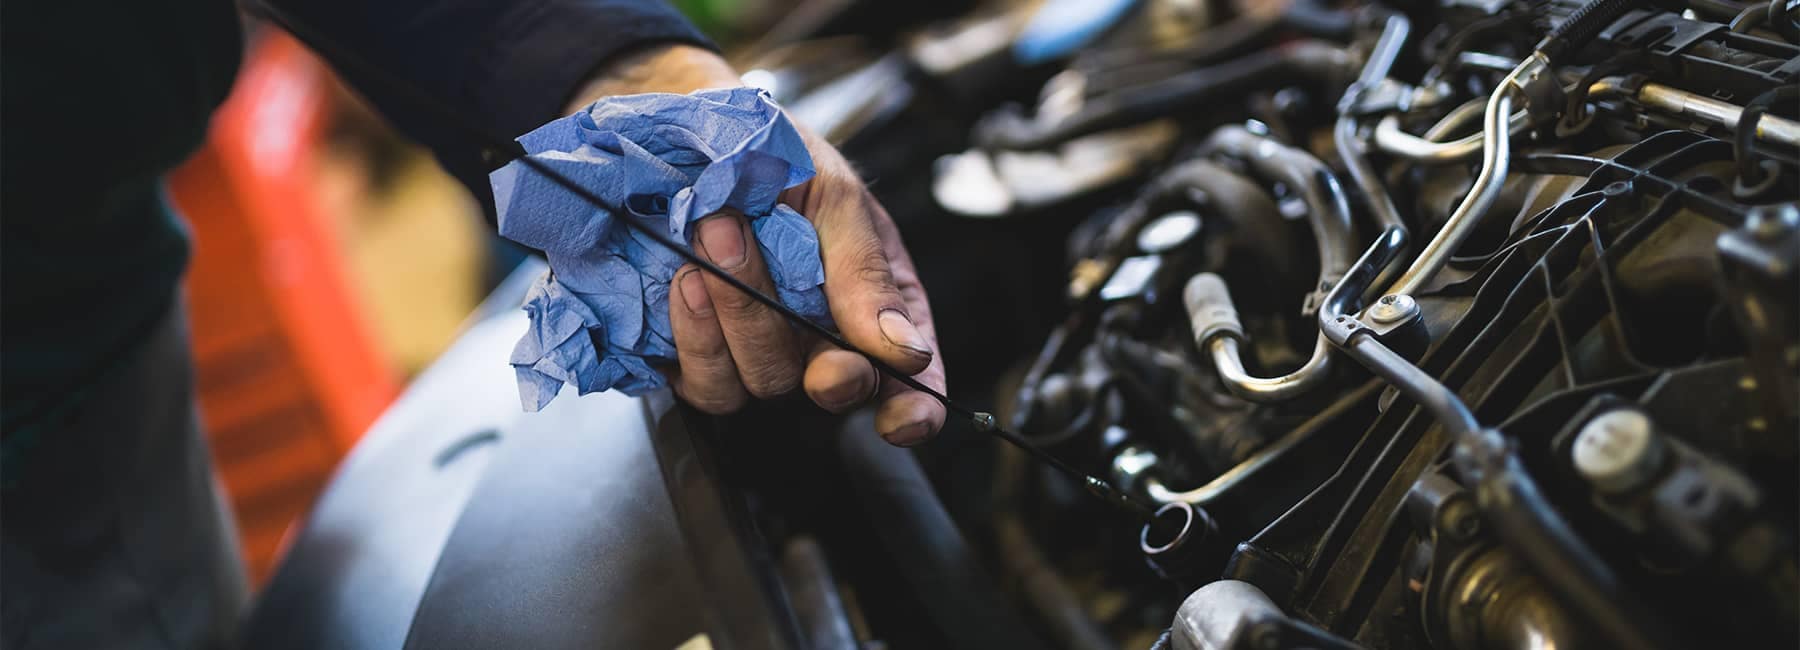 Car service mechanic working on automobile engine repair in fort worth, tx